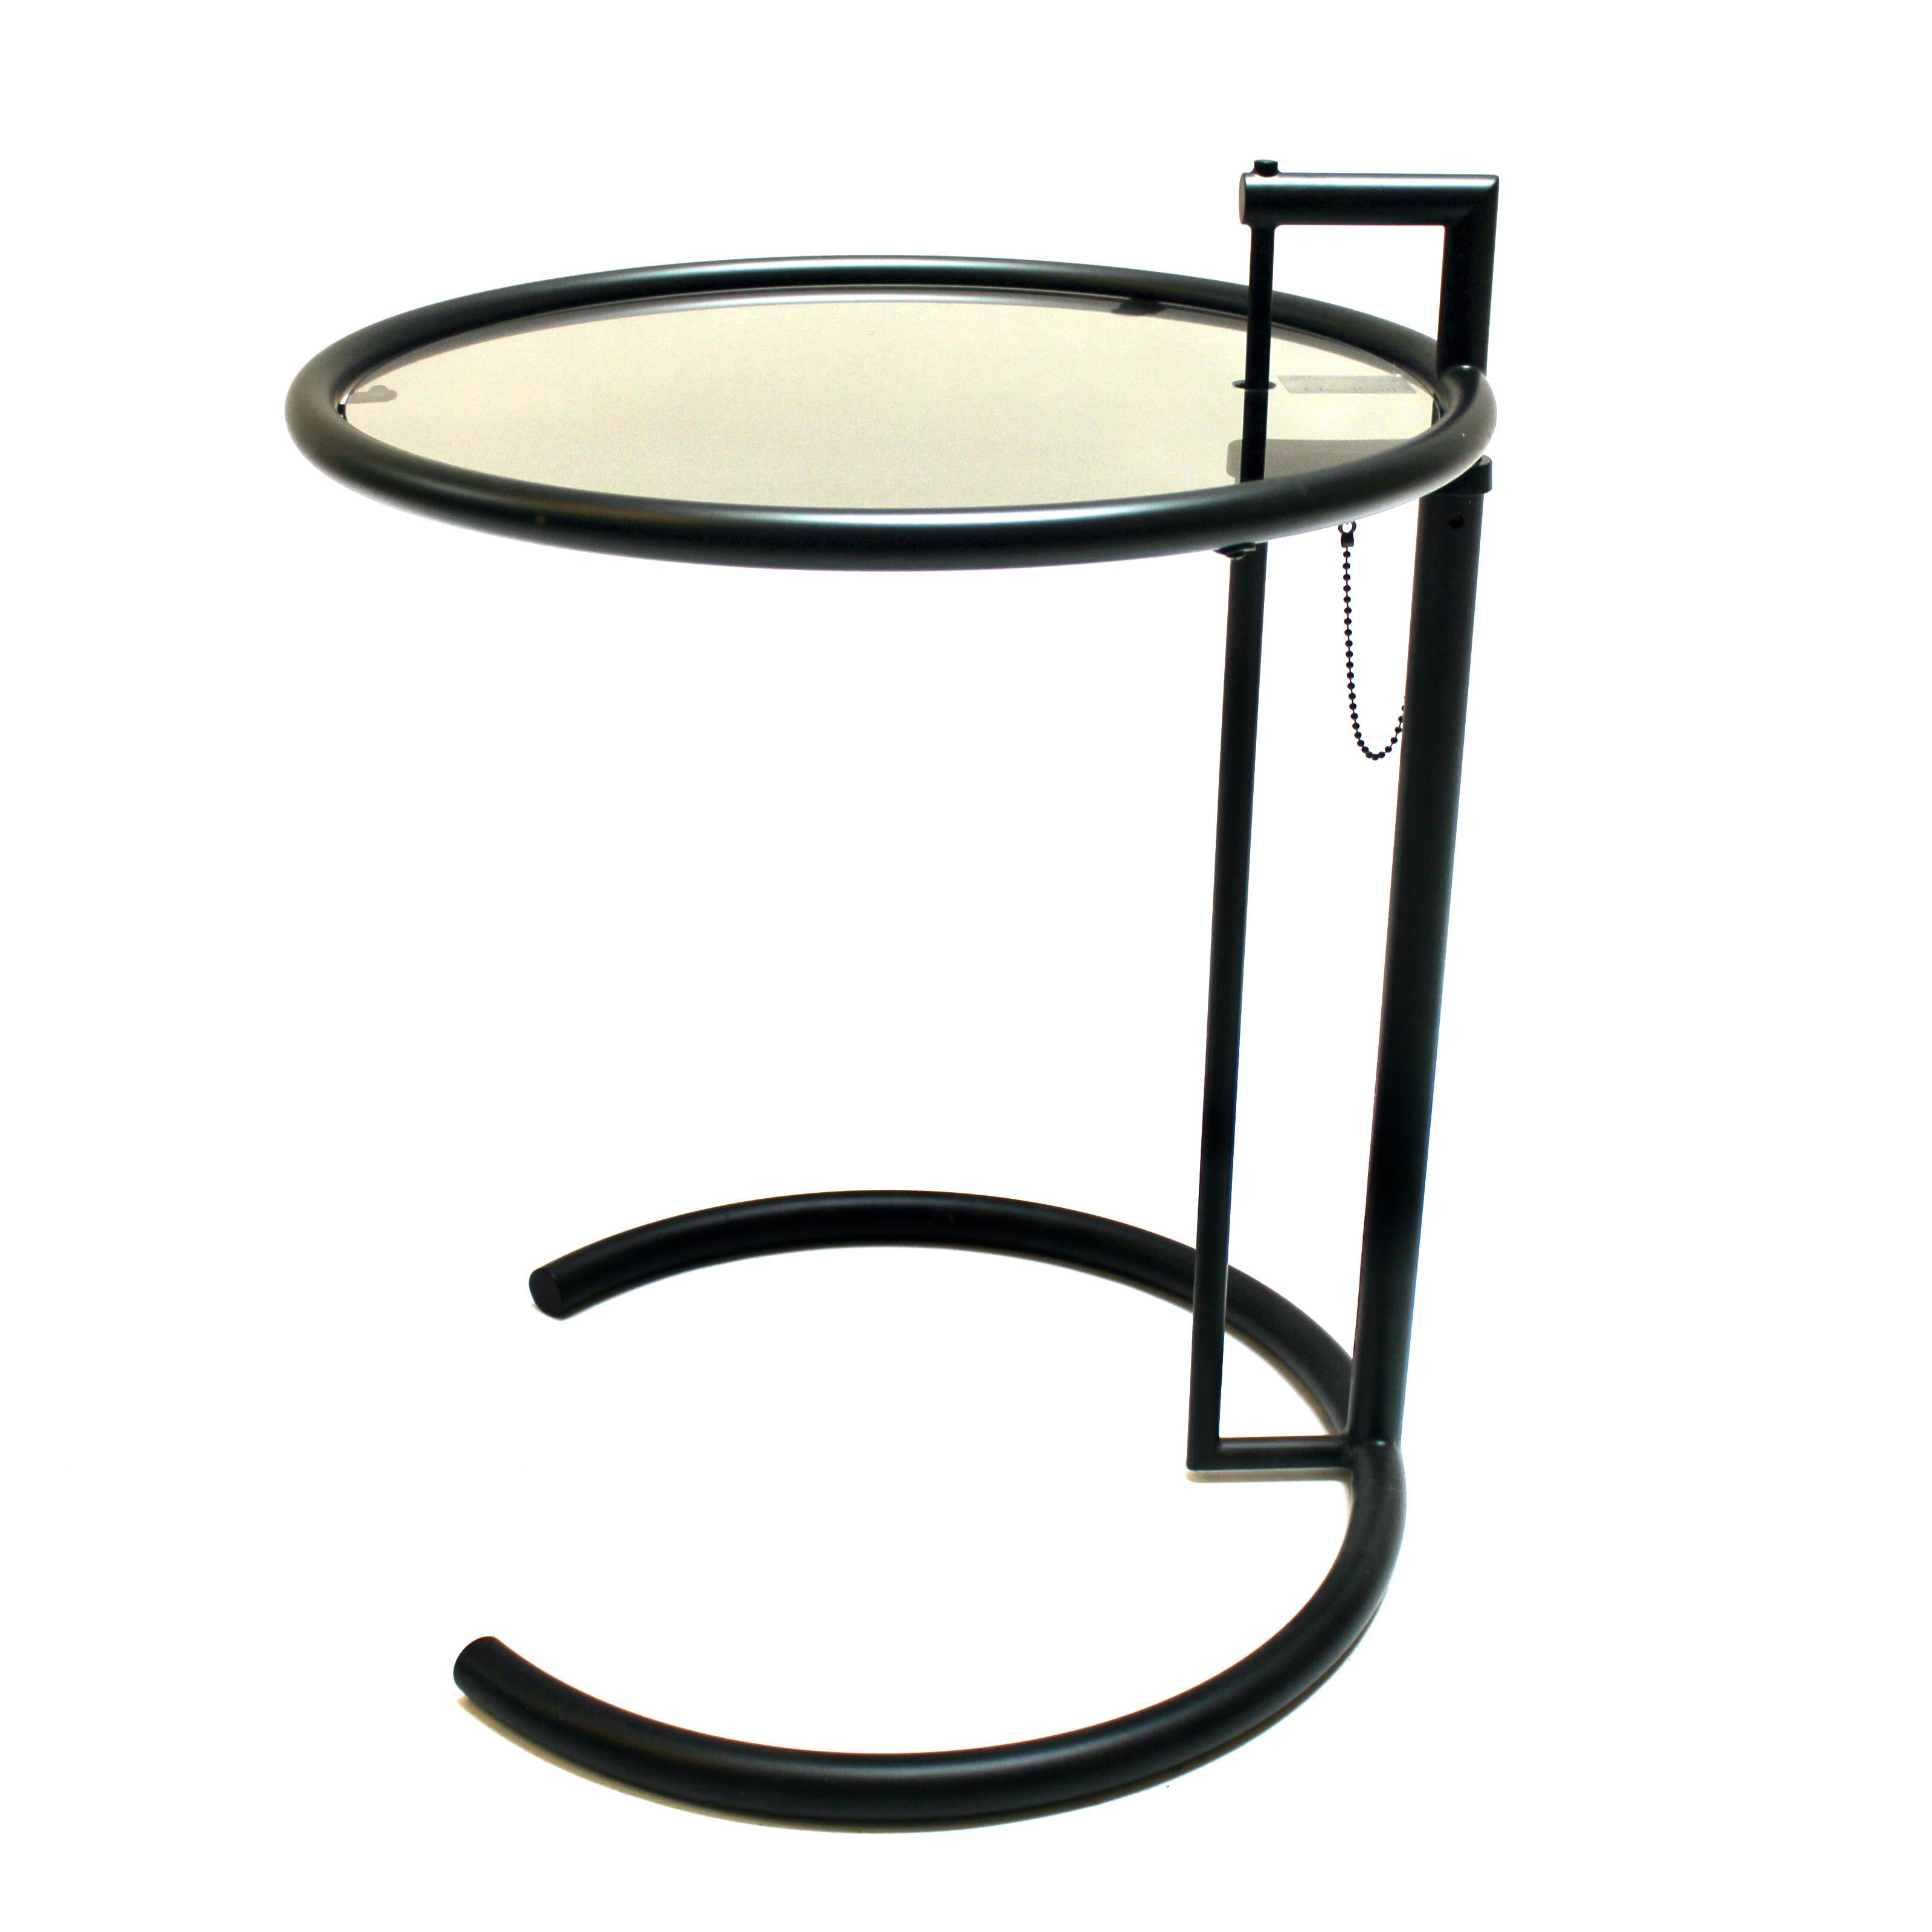 Eileen Gray E1027 adjustable black metal and smoked glass side table. This model is officially licensed by Aram Design Ltd. and manufactured by ClassiCon in Italy. The height adjusts from 25 inches to a maximum of 40 inches. In excellent condition,